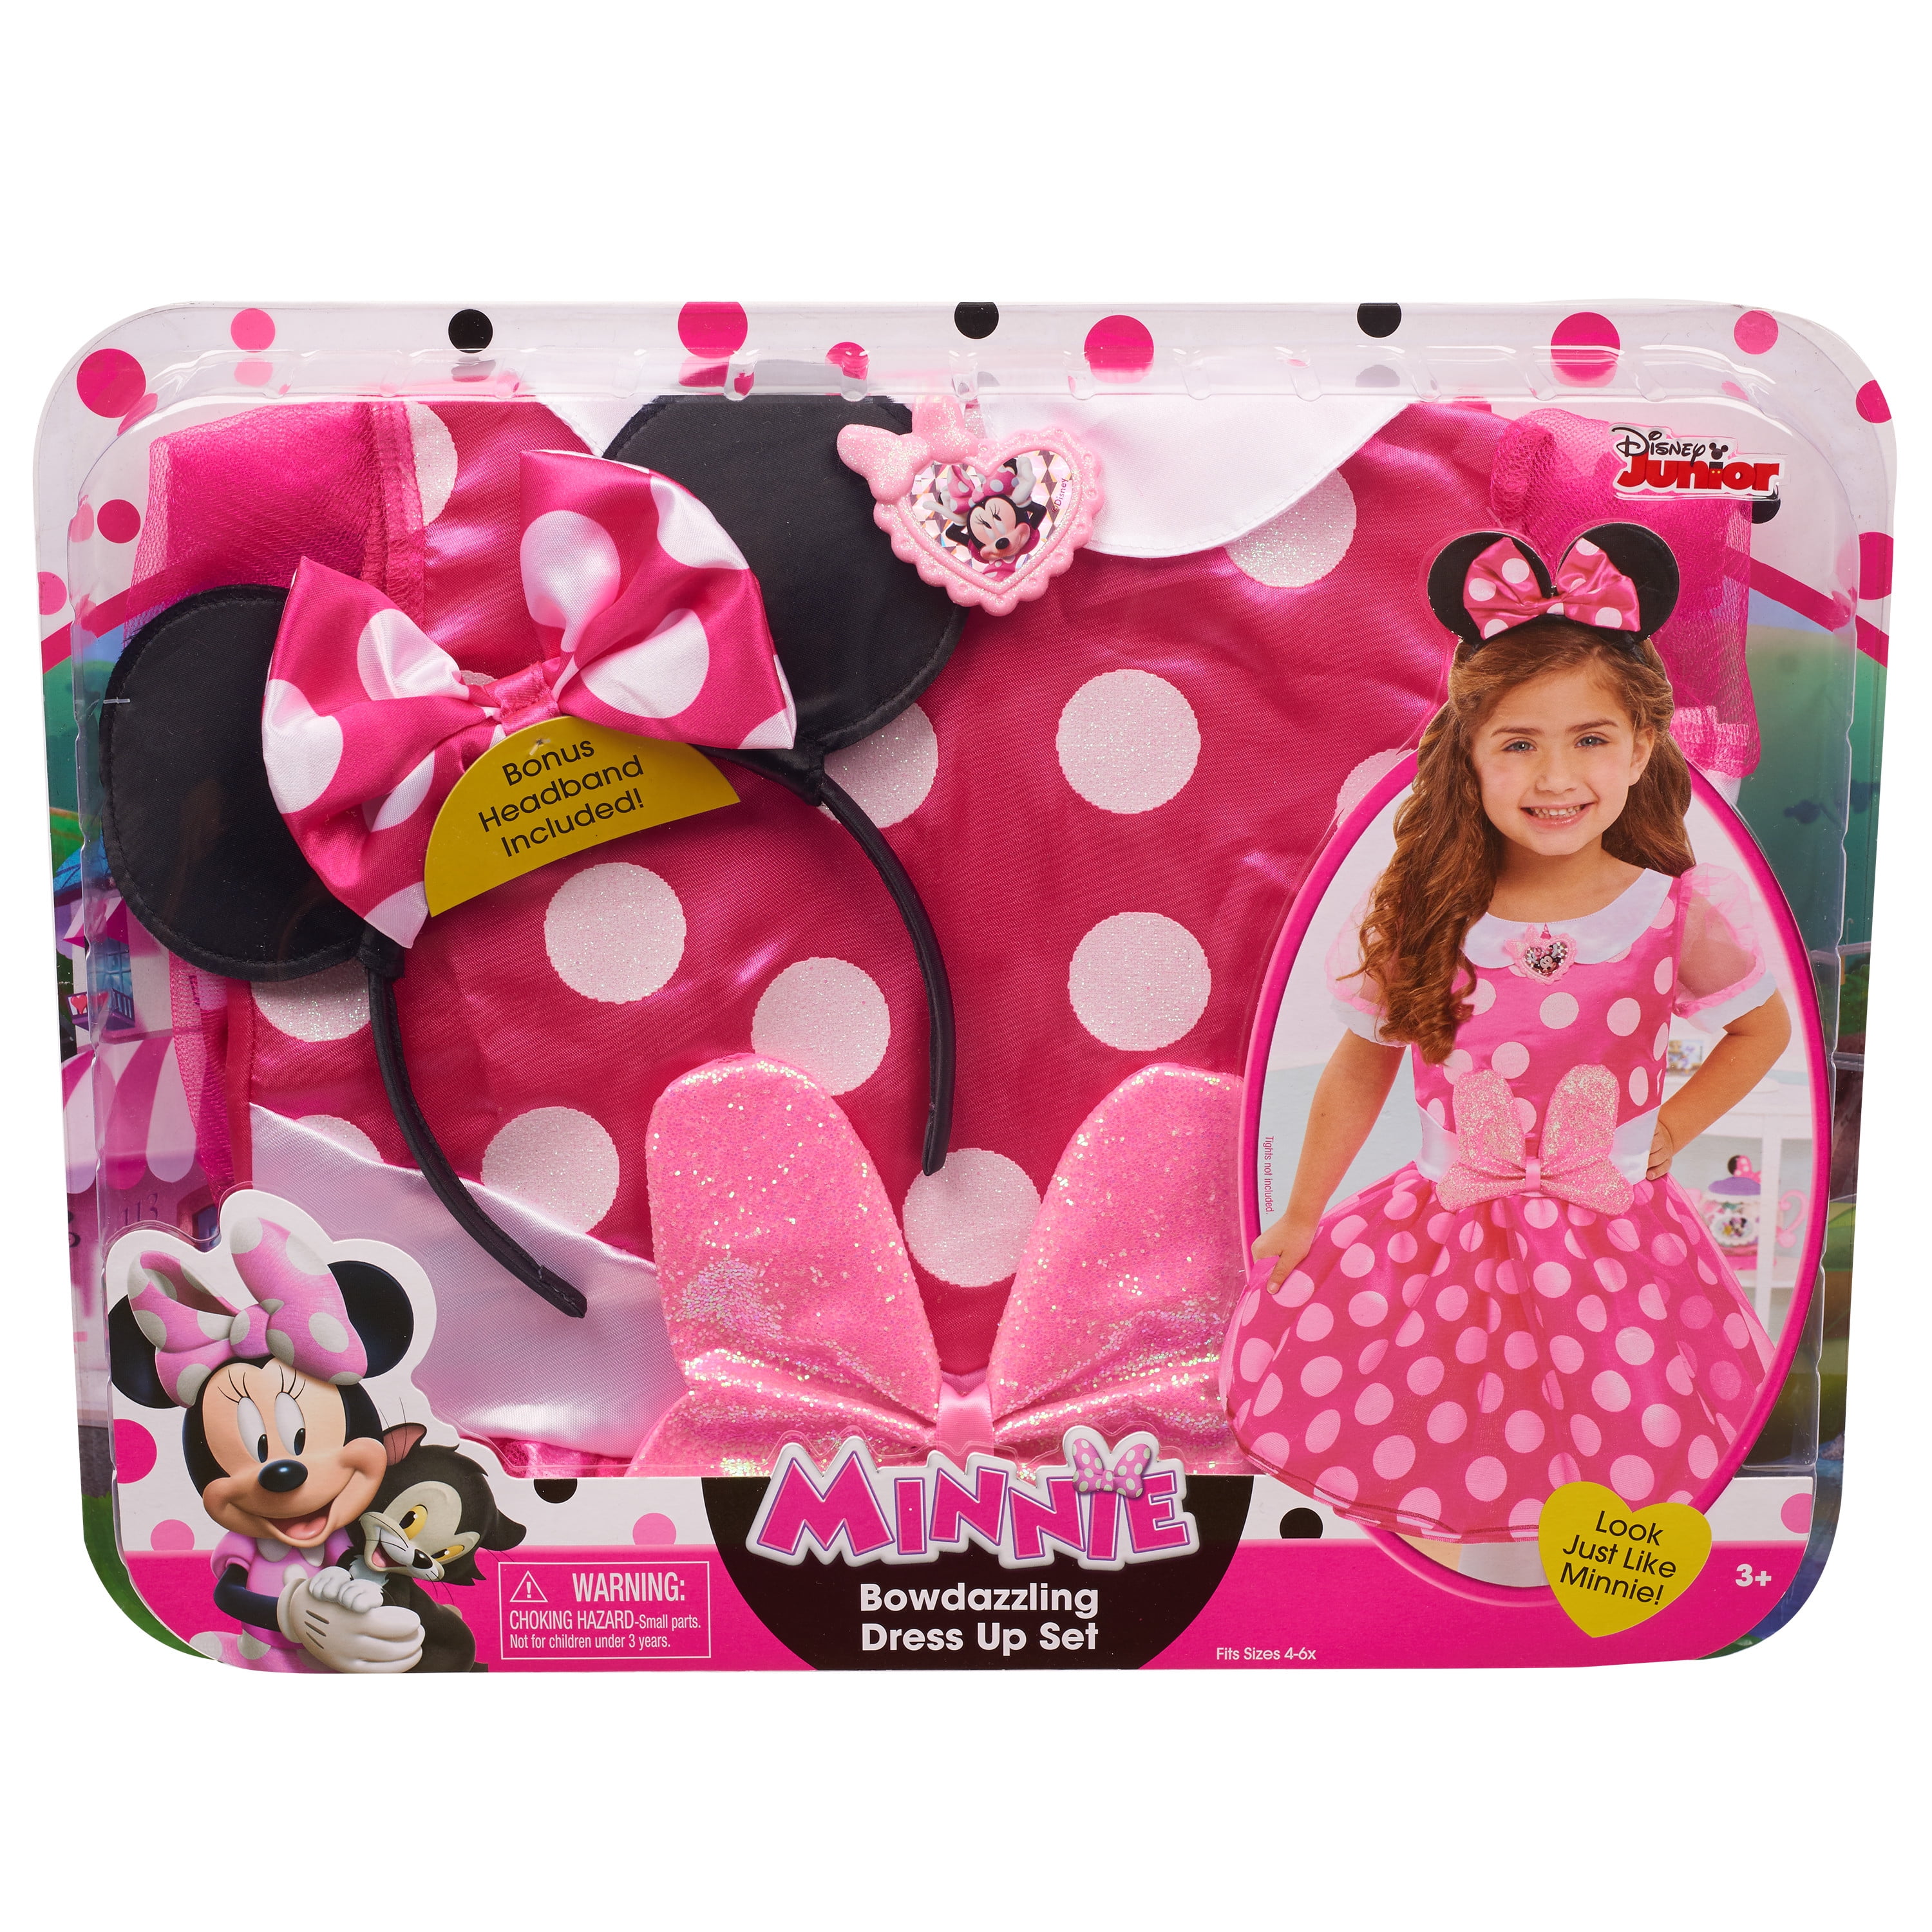 Minnie Mouse Bowdazzling Dress, Officially Licensed Kids Toys for Ages 3 Up, Gifts and Presents - 3